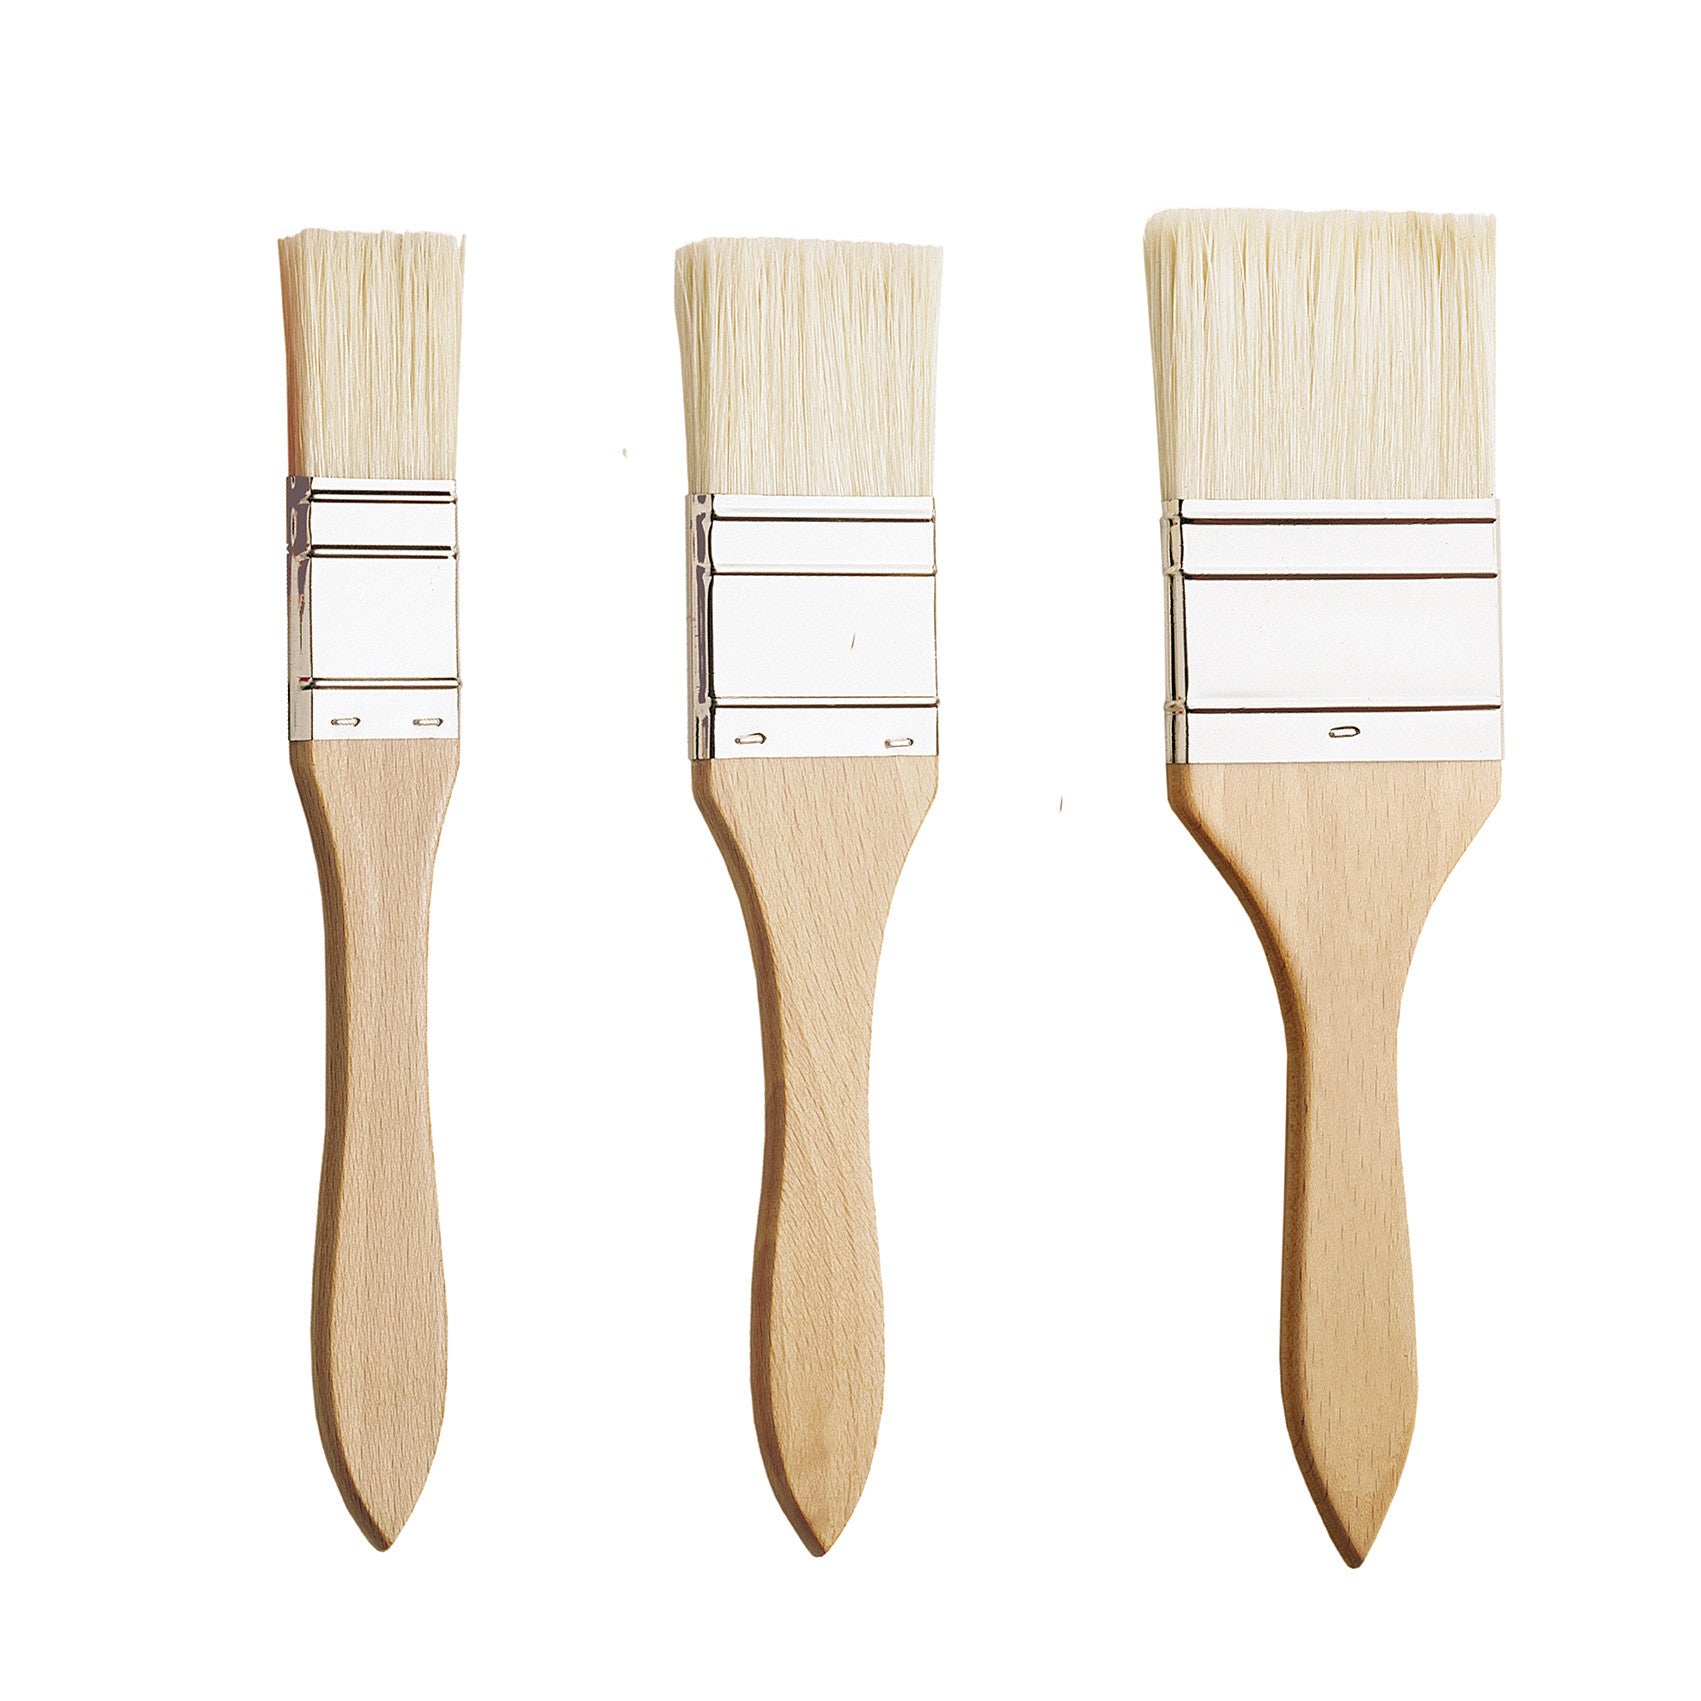 Pro Arte Series 22 varnish brushes are a range of three large-area Bristle Brushes. Ideal for applying varnish or for painting in Oil and Acrylic. The brushes are manufactured with a smooth wooden flat handle and nickel ferrule. The natural hair used provides great spring for control.